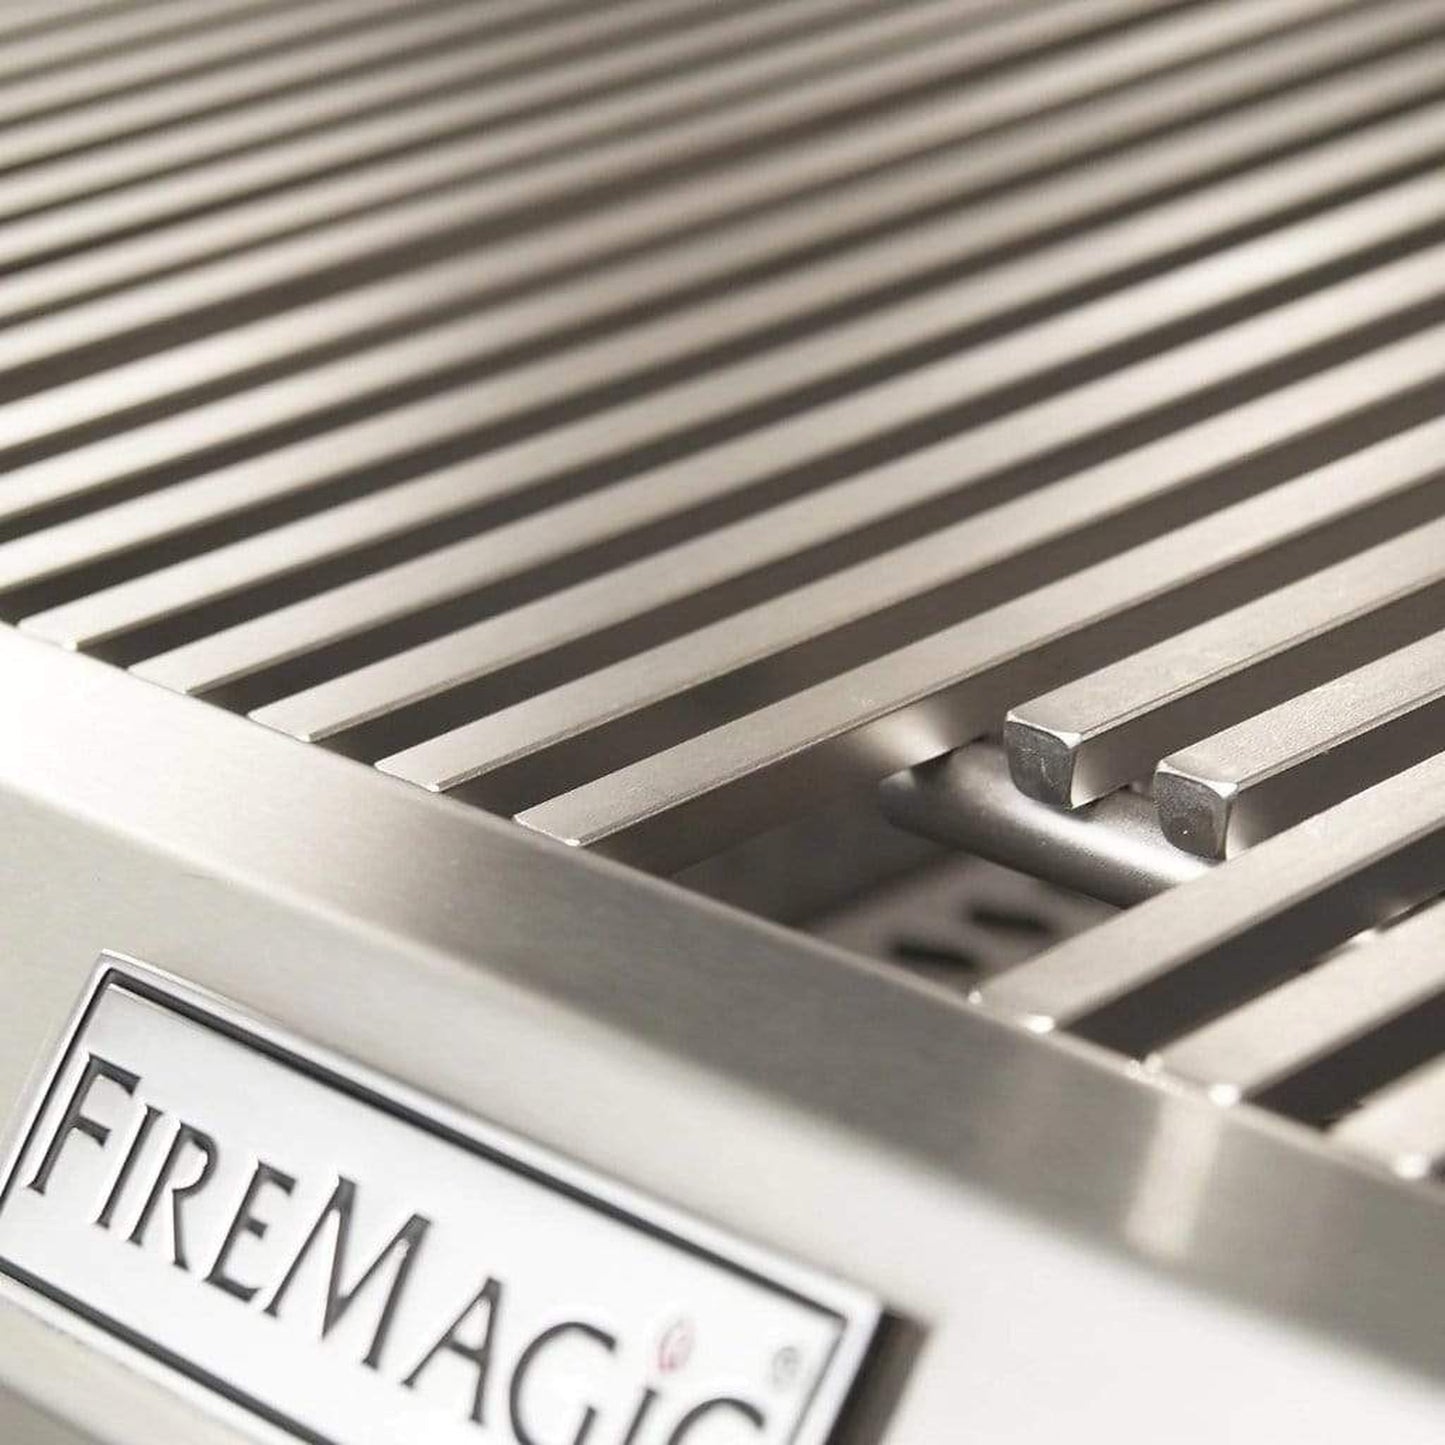 Fire Magic 24" 2-Burner Legacy Deluxe Built-In Gas Grill